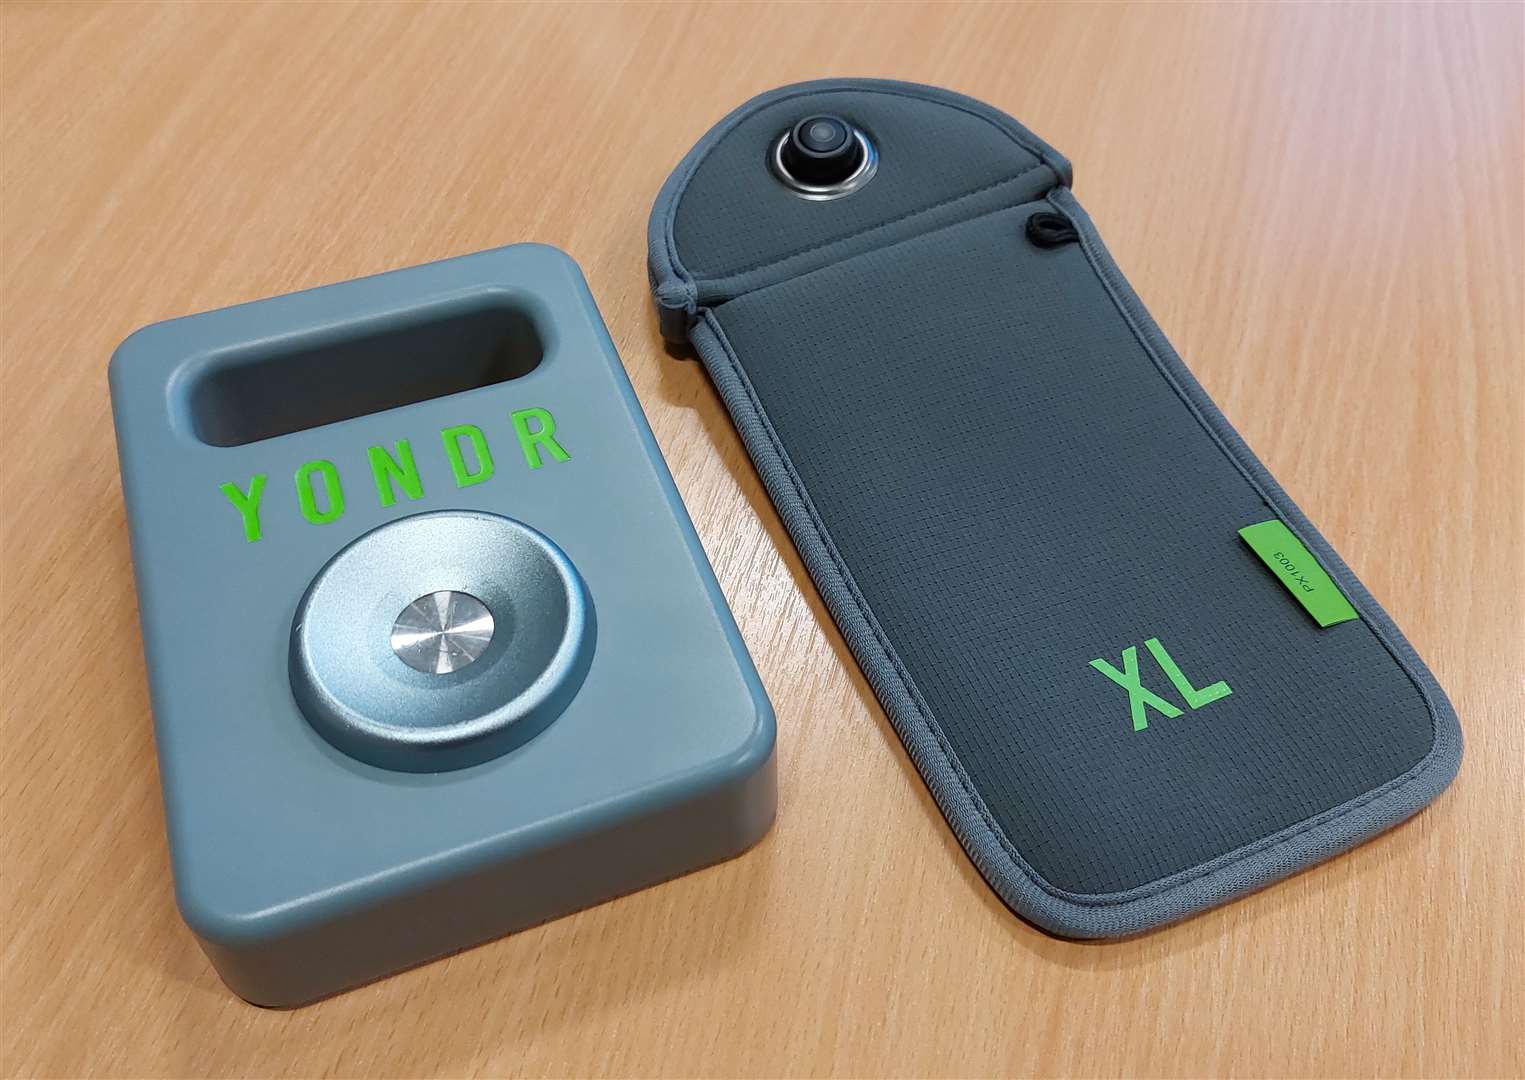 Yondr pouches which lock away phones were introduced at the John Wallis Academy on January 3